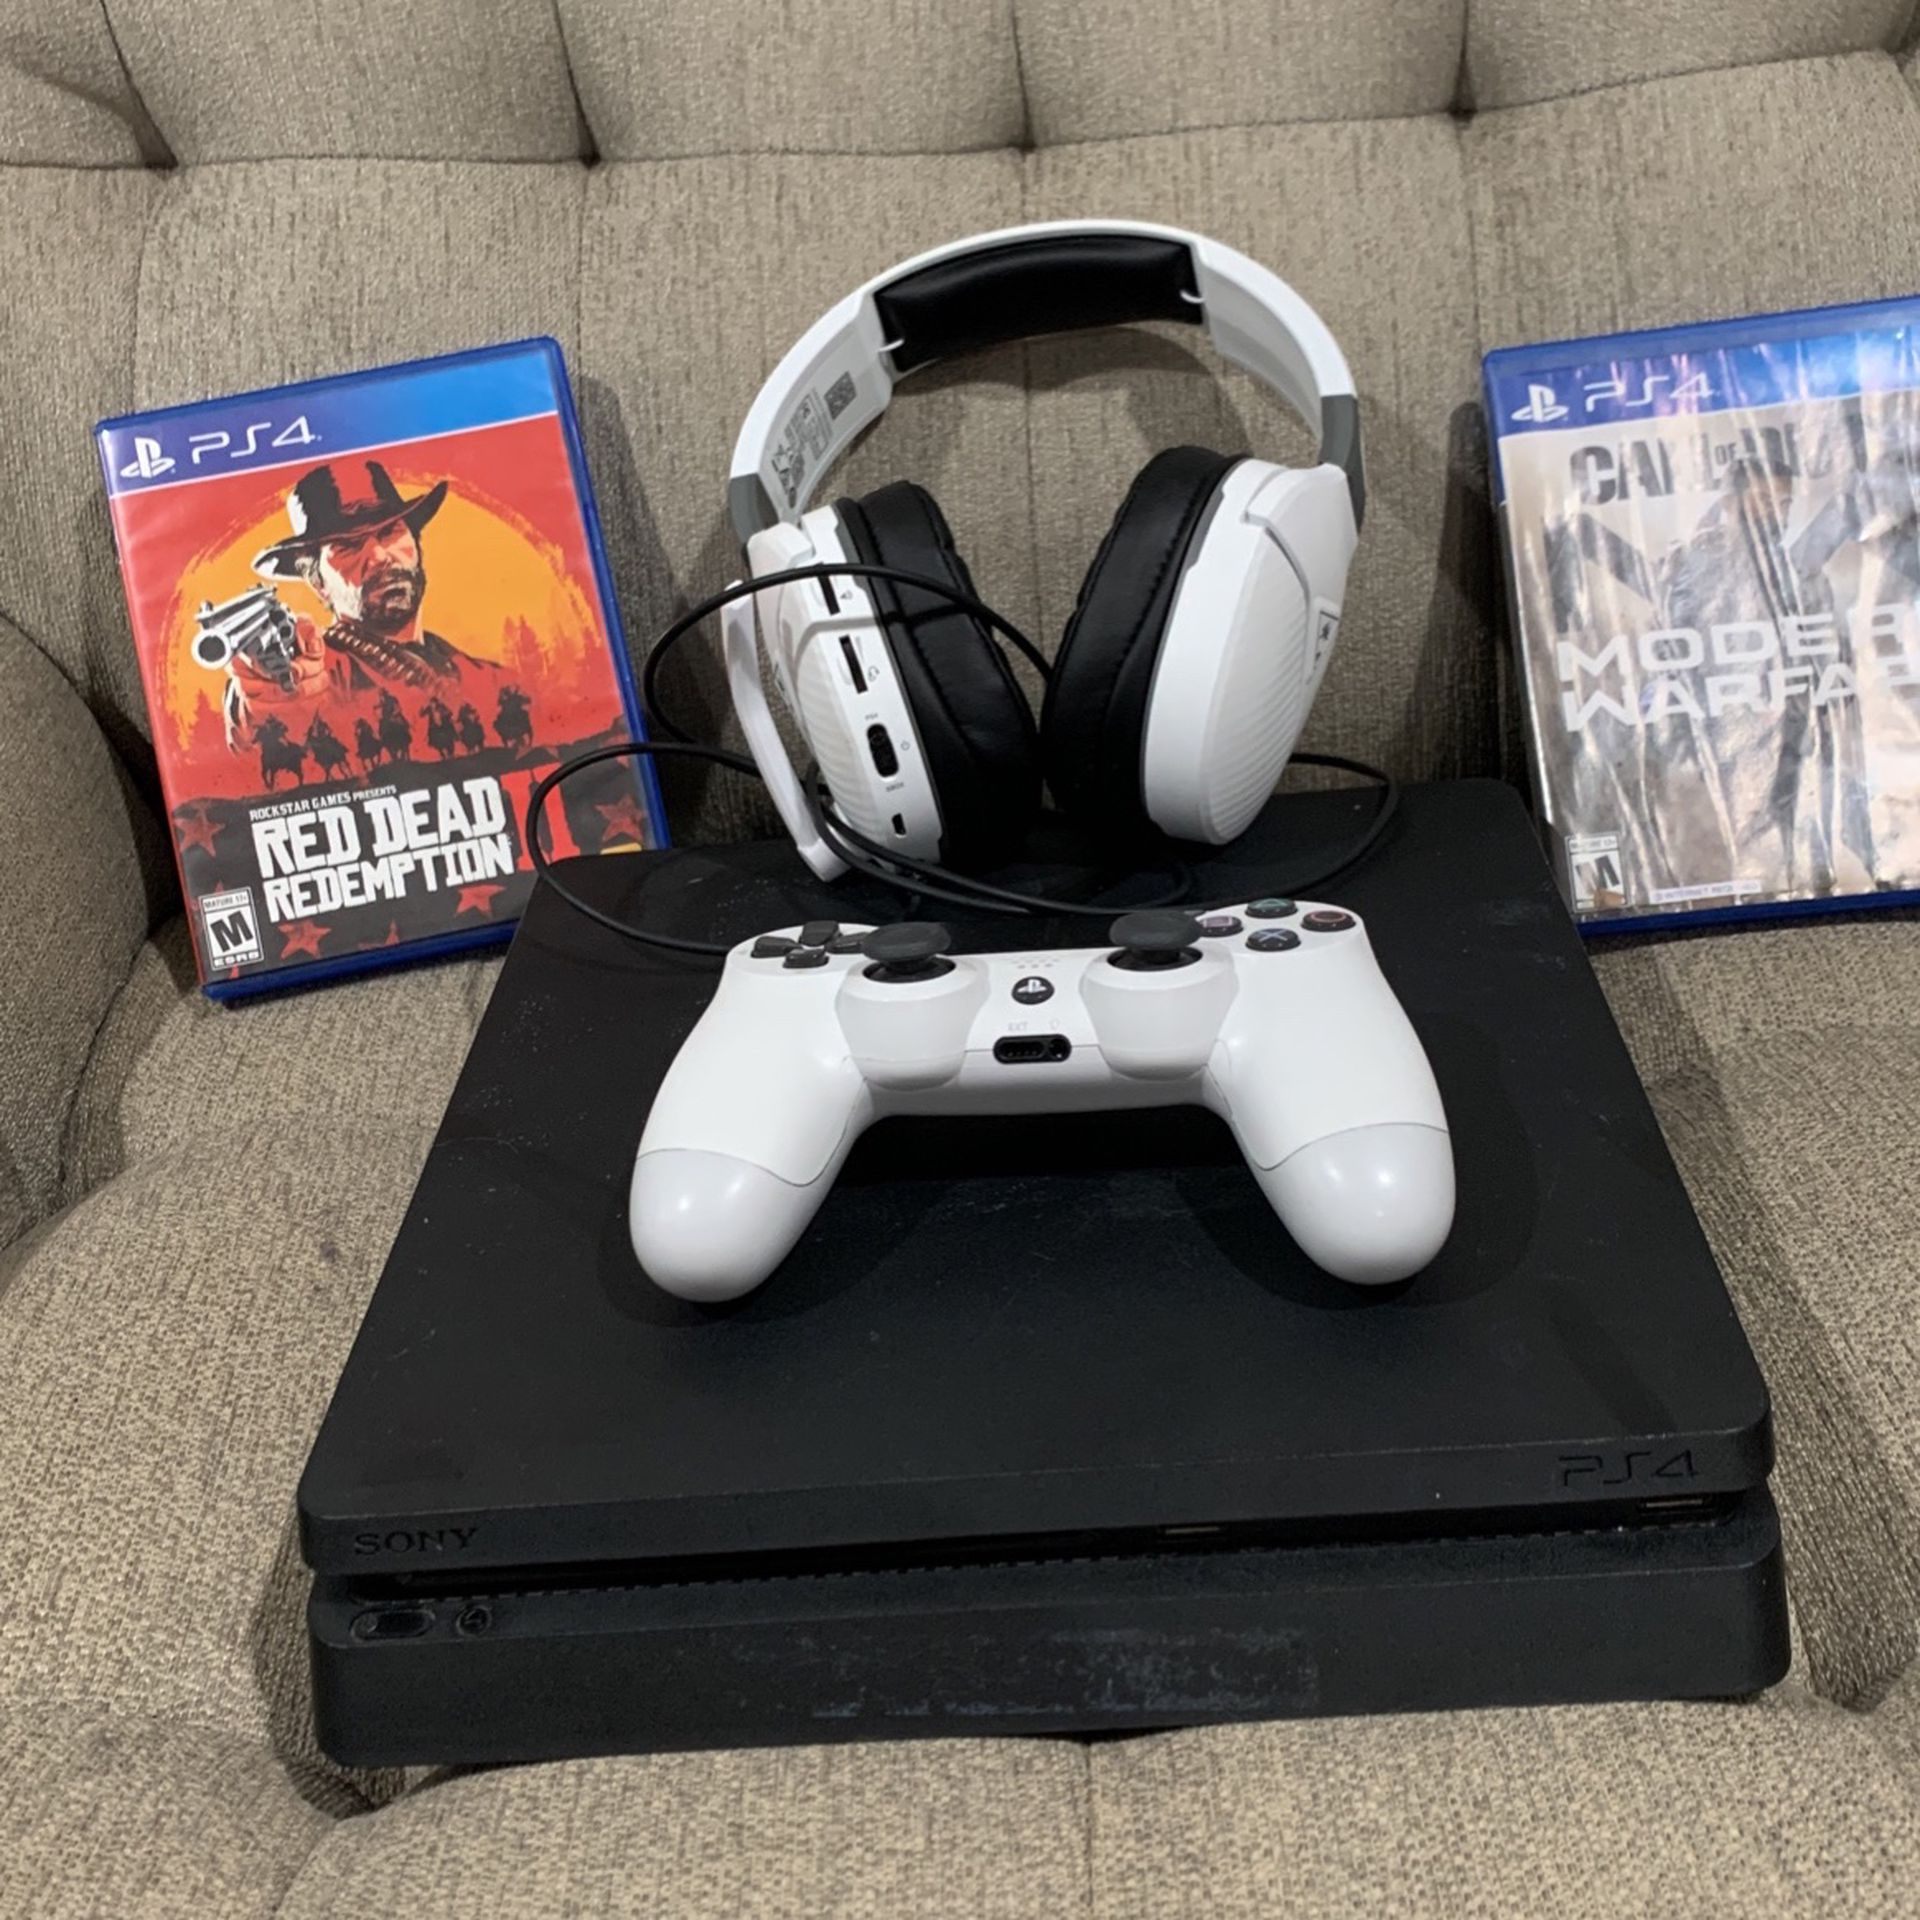 PS4 Slim/ White Ps4 Controller/ 4 Games/ Turtle Beach Headset